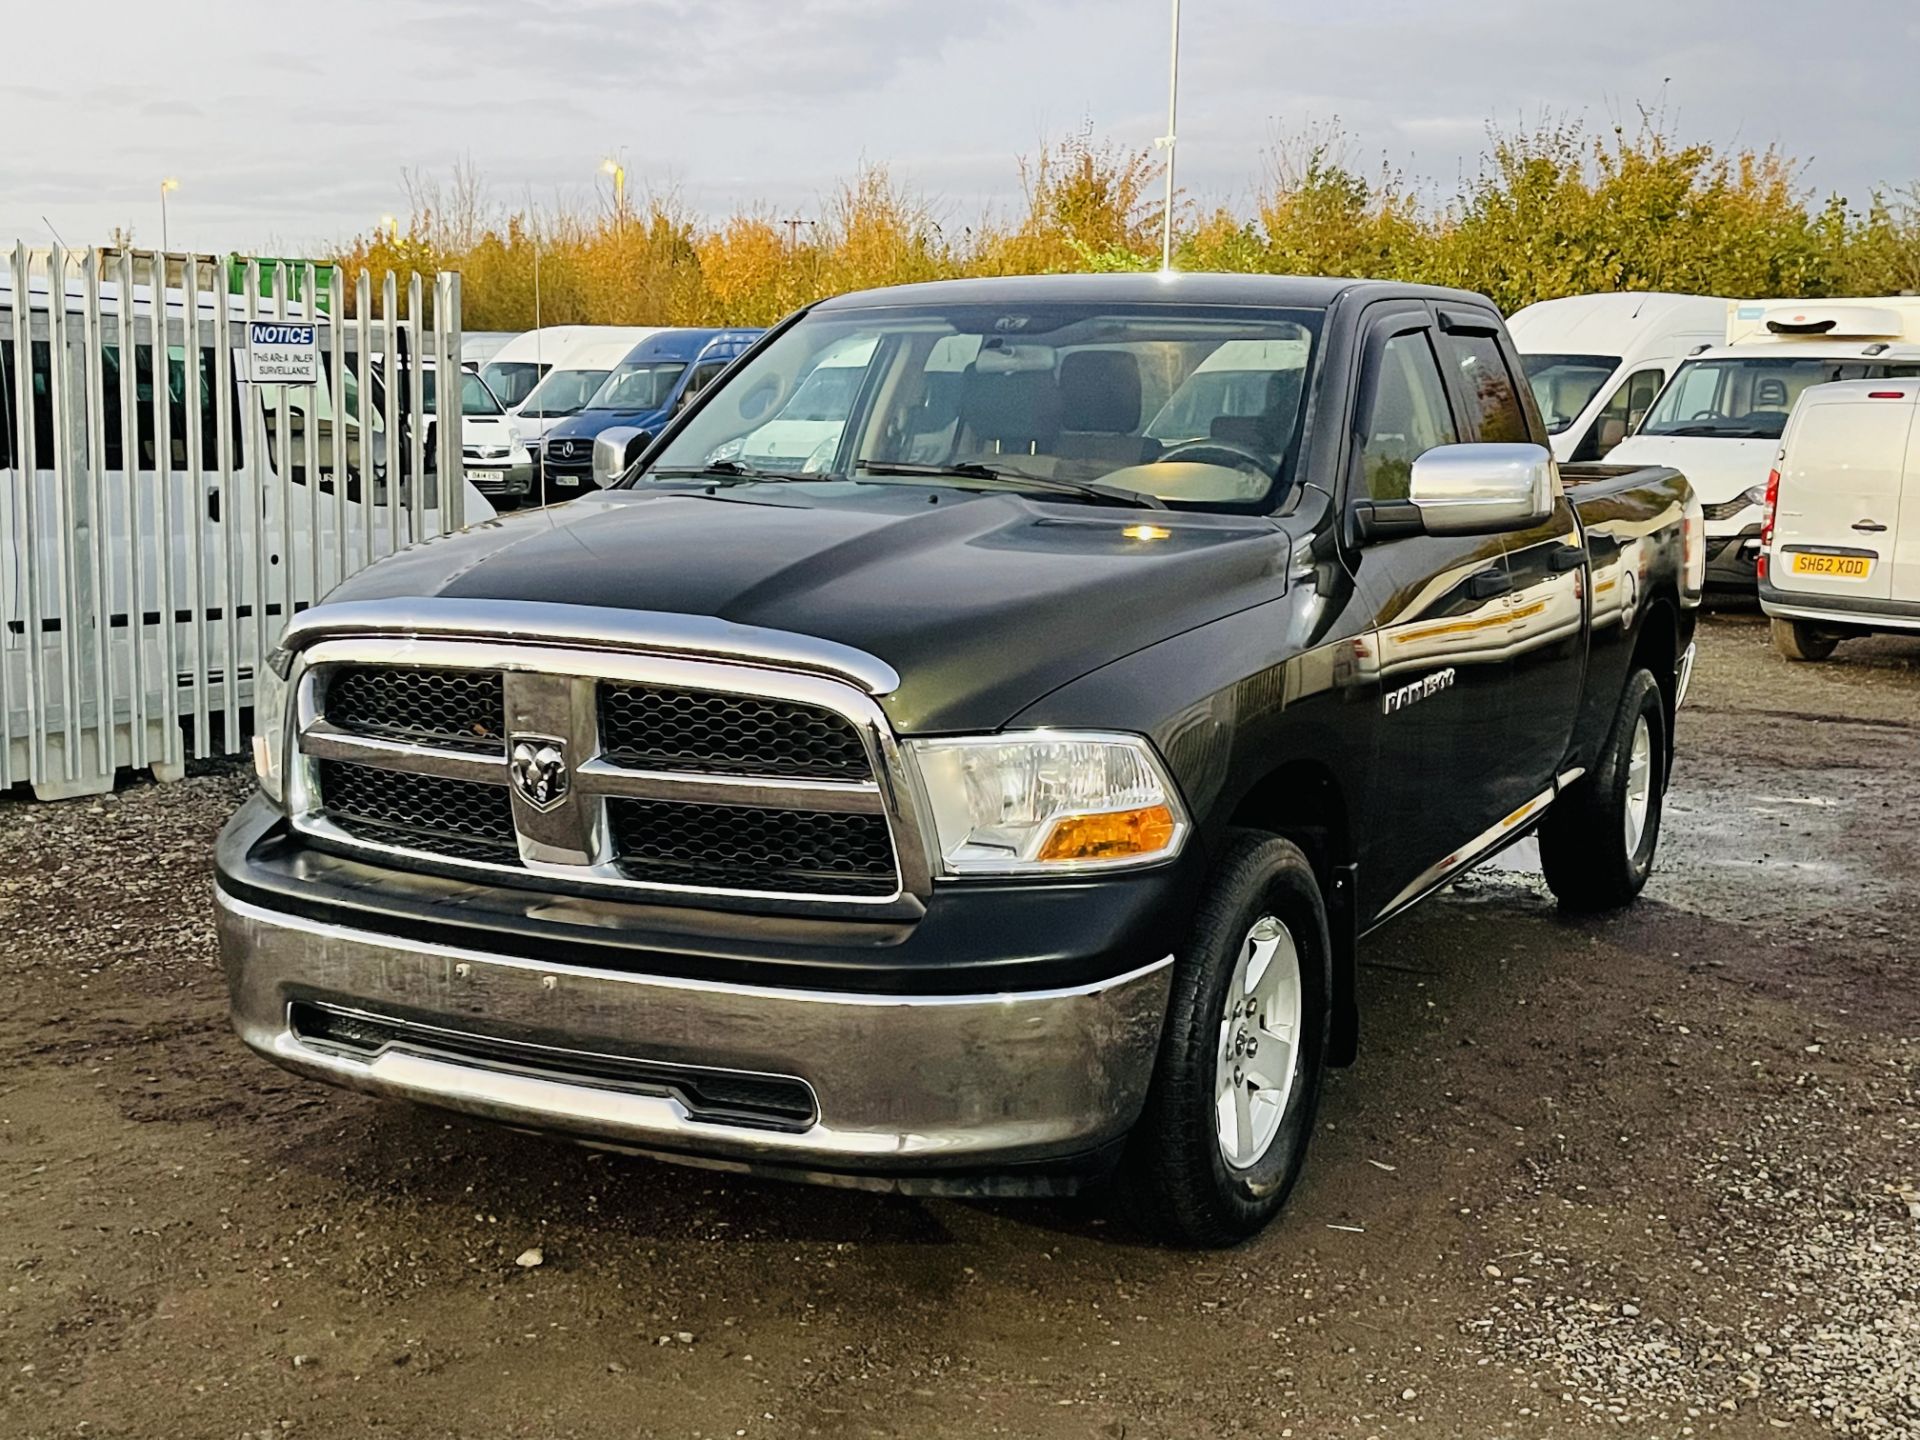 Dodge Ram 4.7 V8 1500 ST 4WD ' 2012 Year ' A/C - Cruise Control - 6 Seats - Image 2 of 27